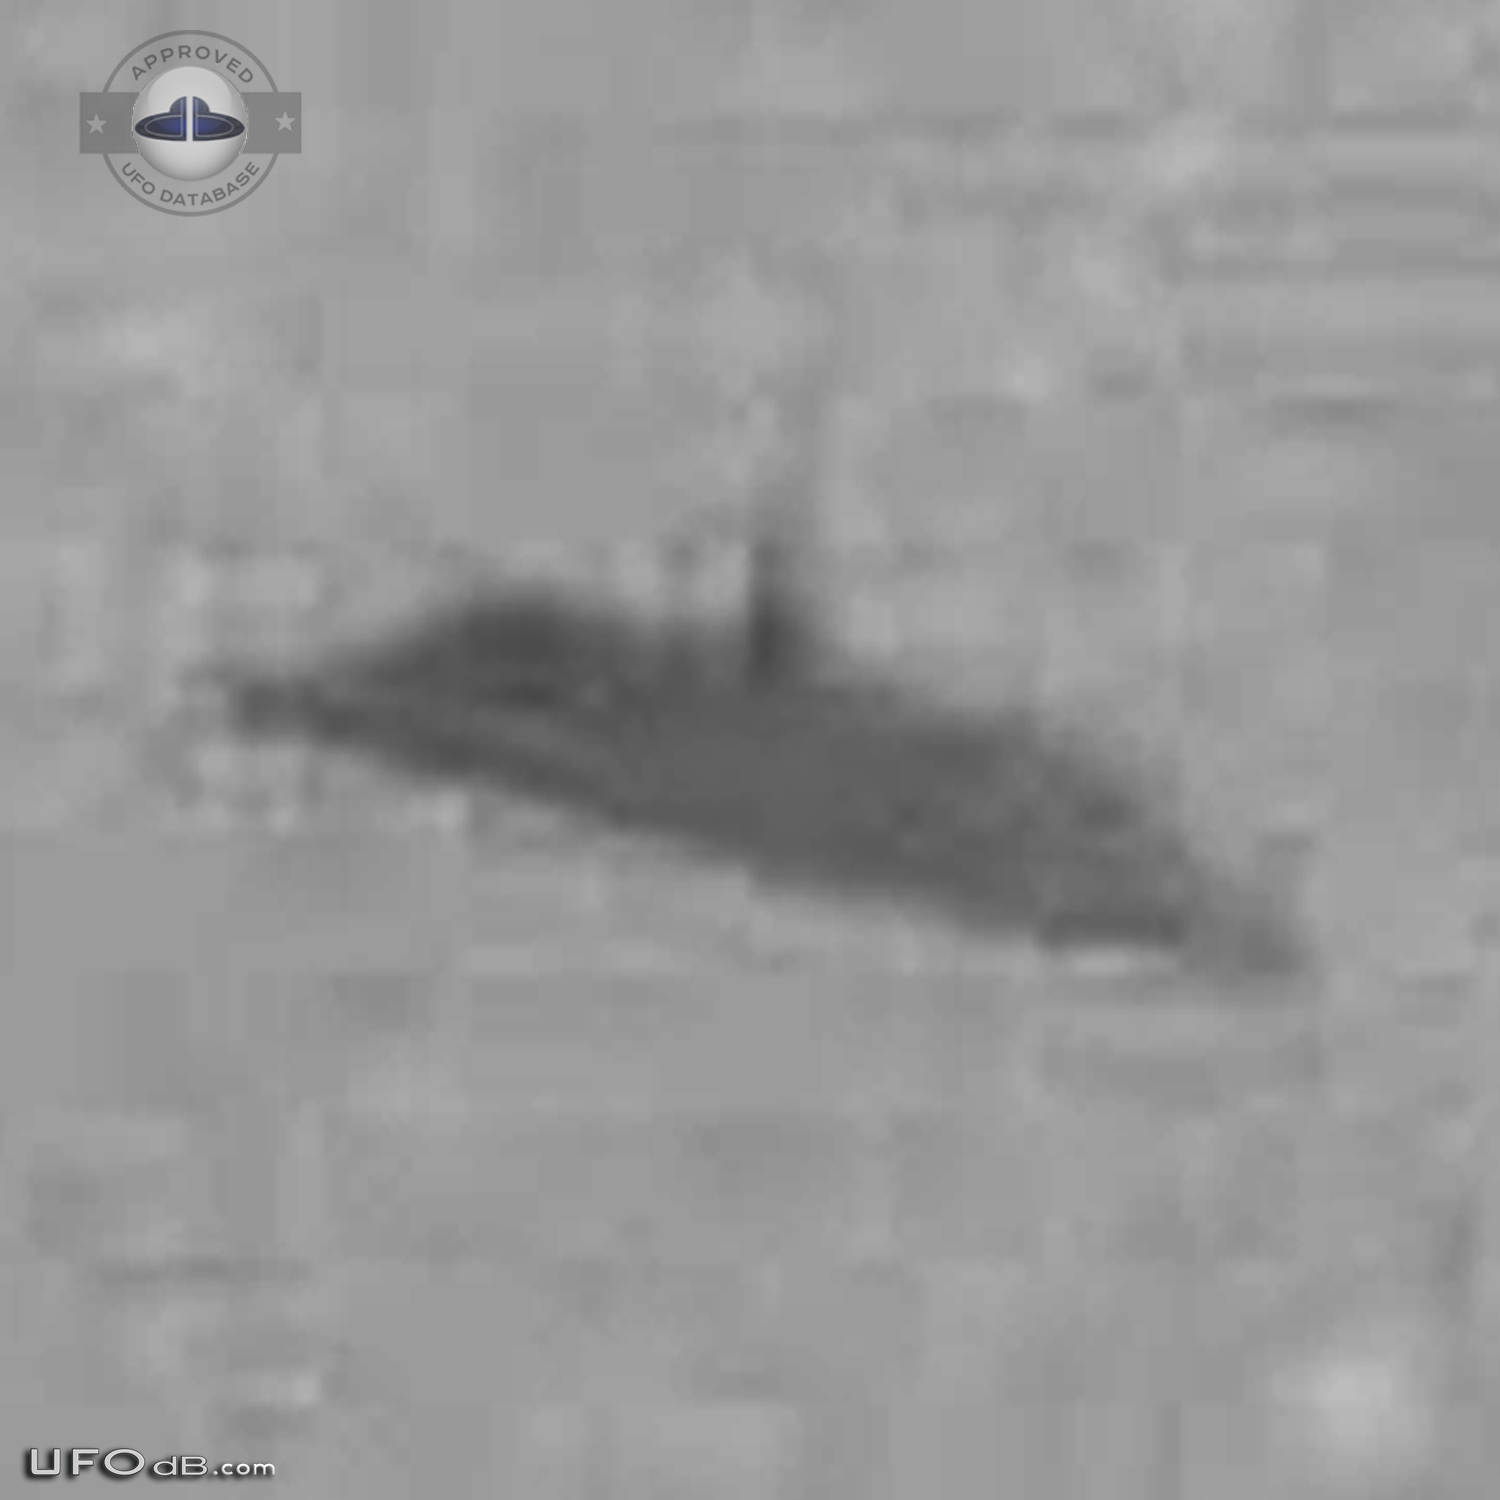 One of the Best UFO picture of all time - 1950 McMinnville, Oregon UFO Picture #423-9